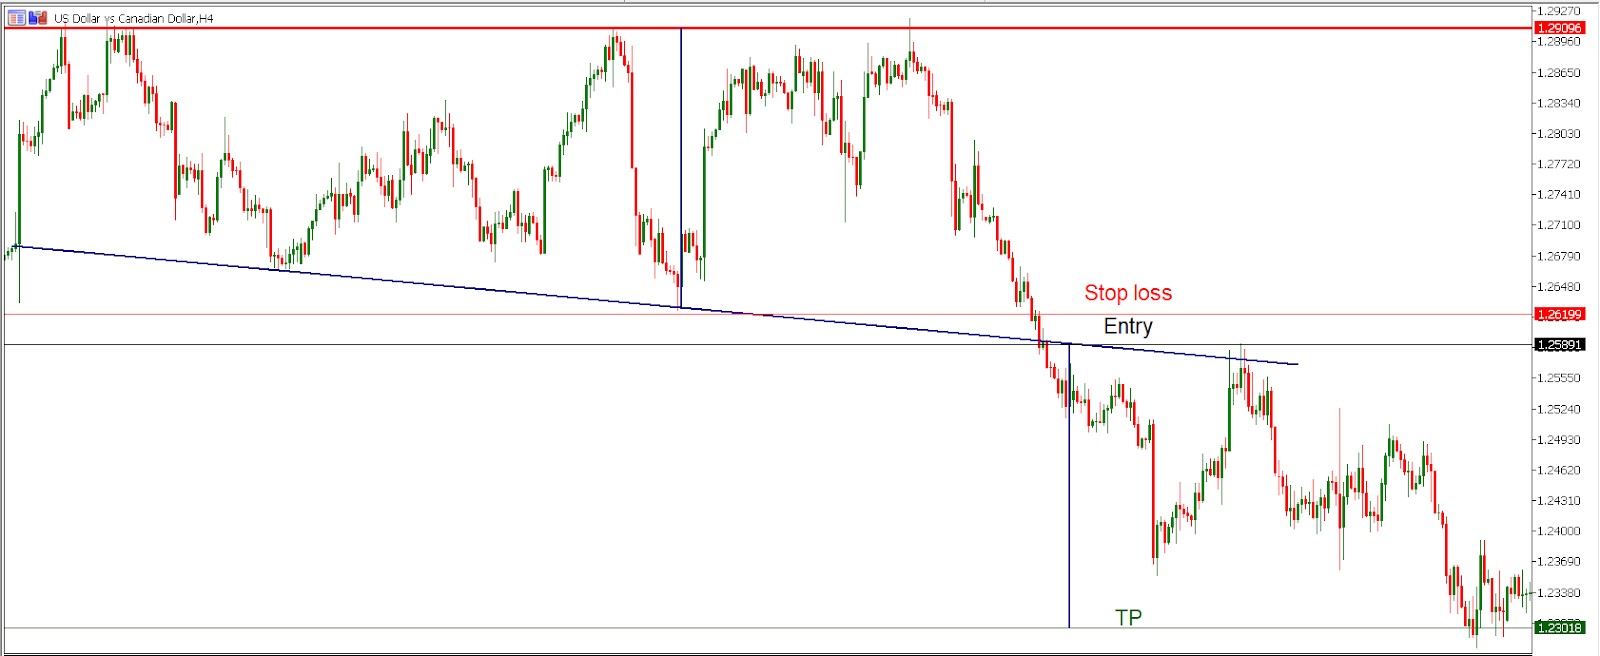 USD/JPY H4 chart - Trading the triple top pattern